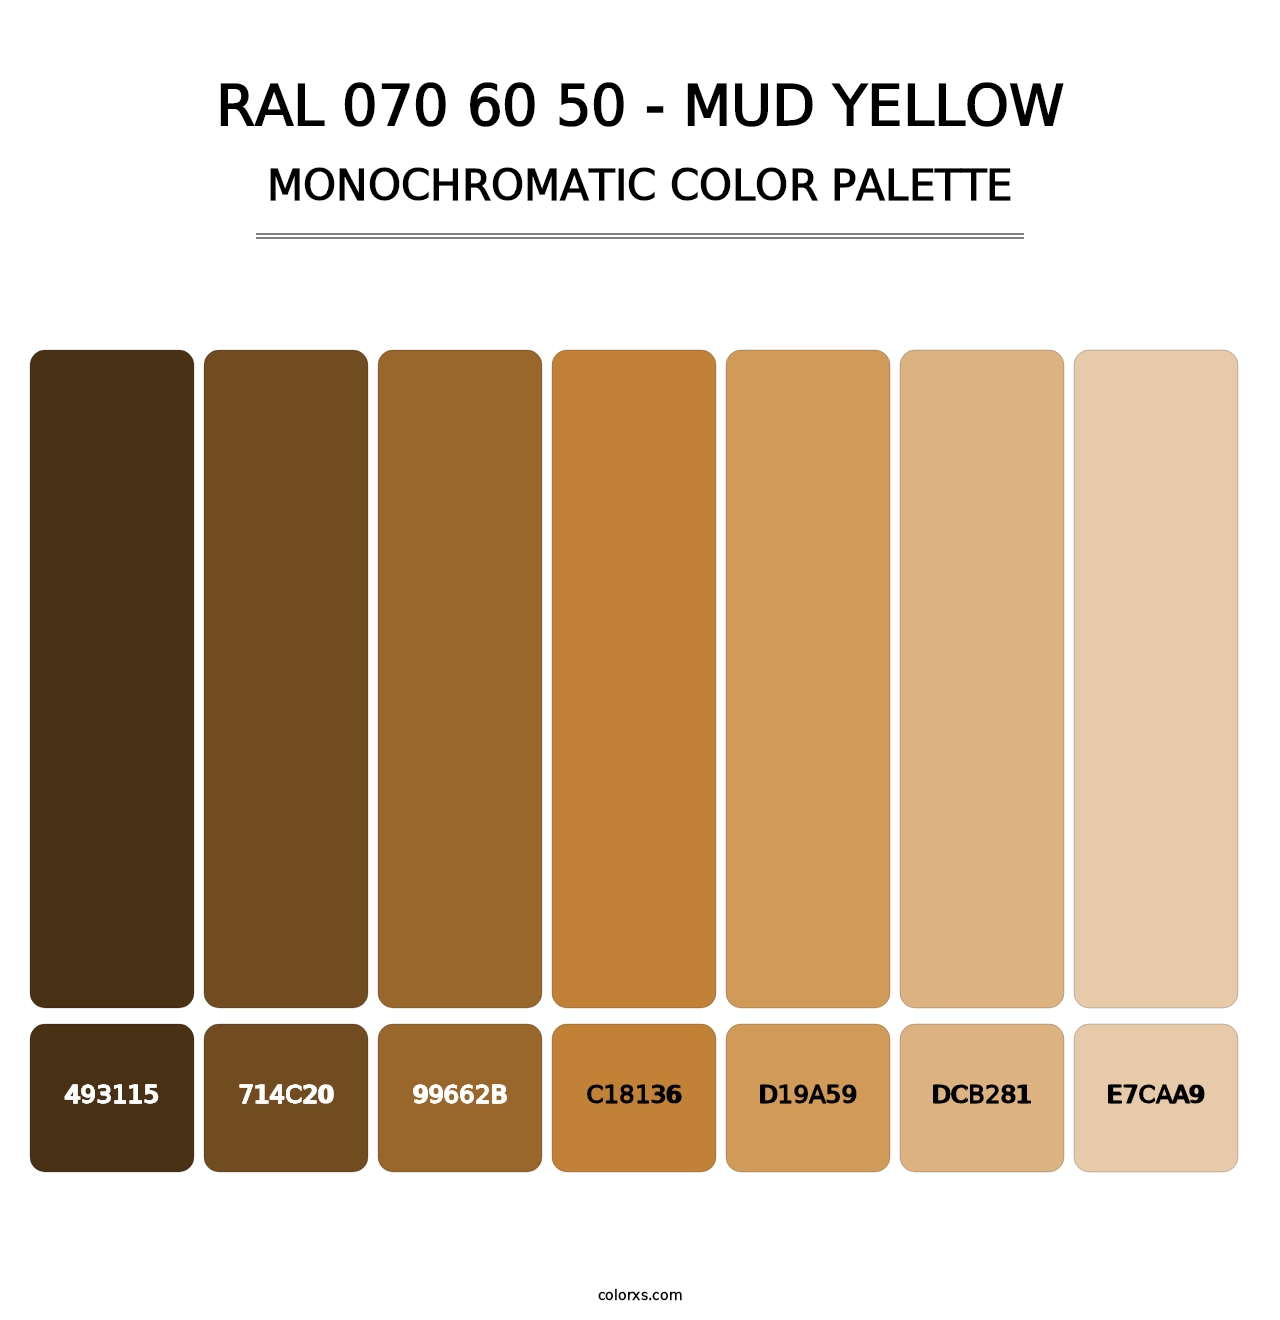 RAL 070 60 50 - Mud Yellow - Monochromatic Color Palette